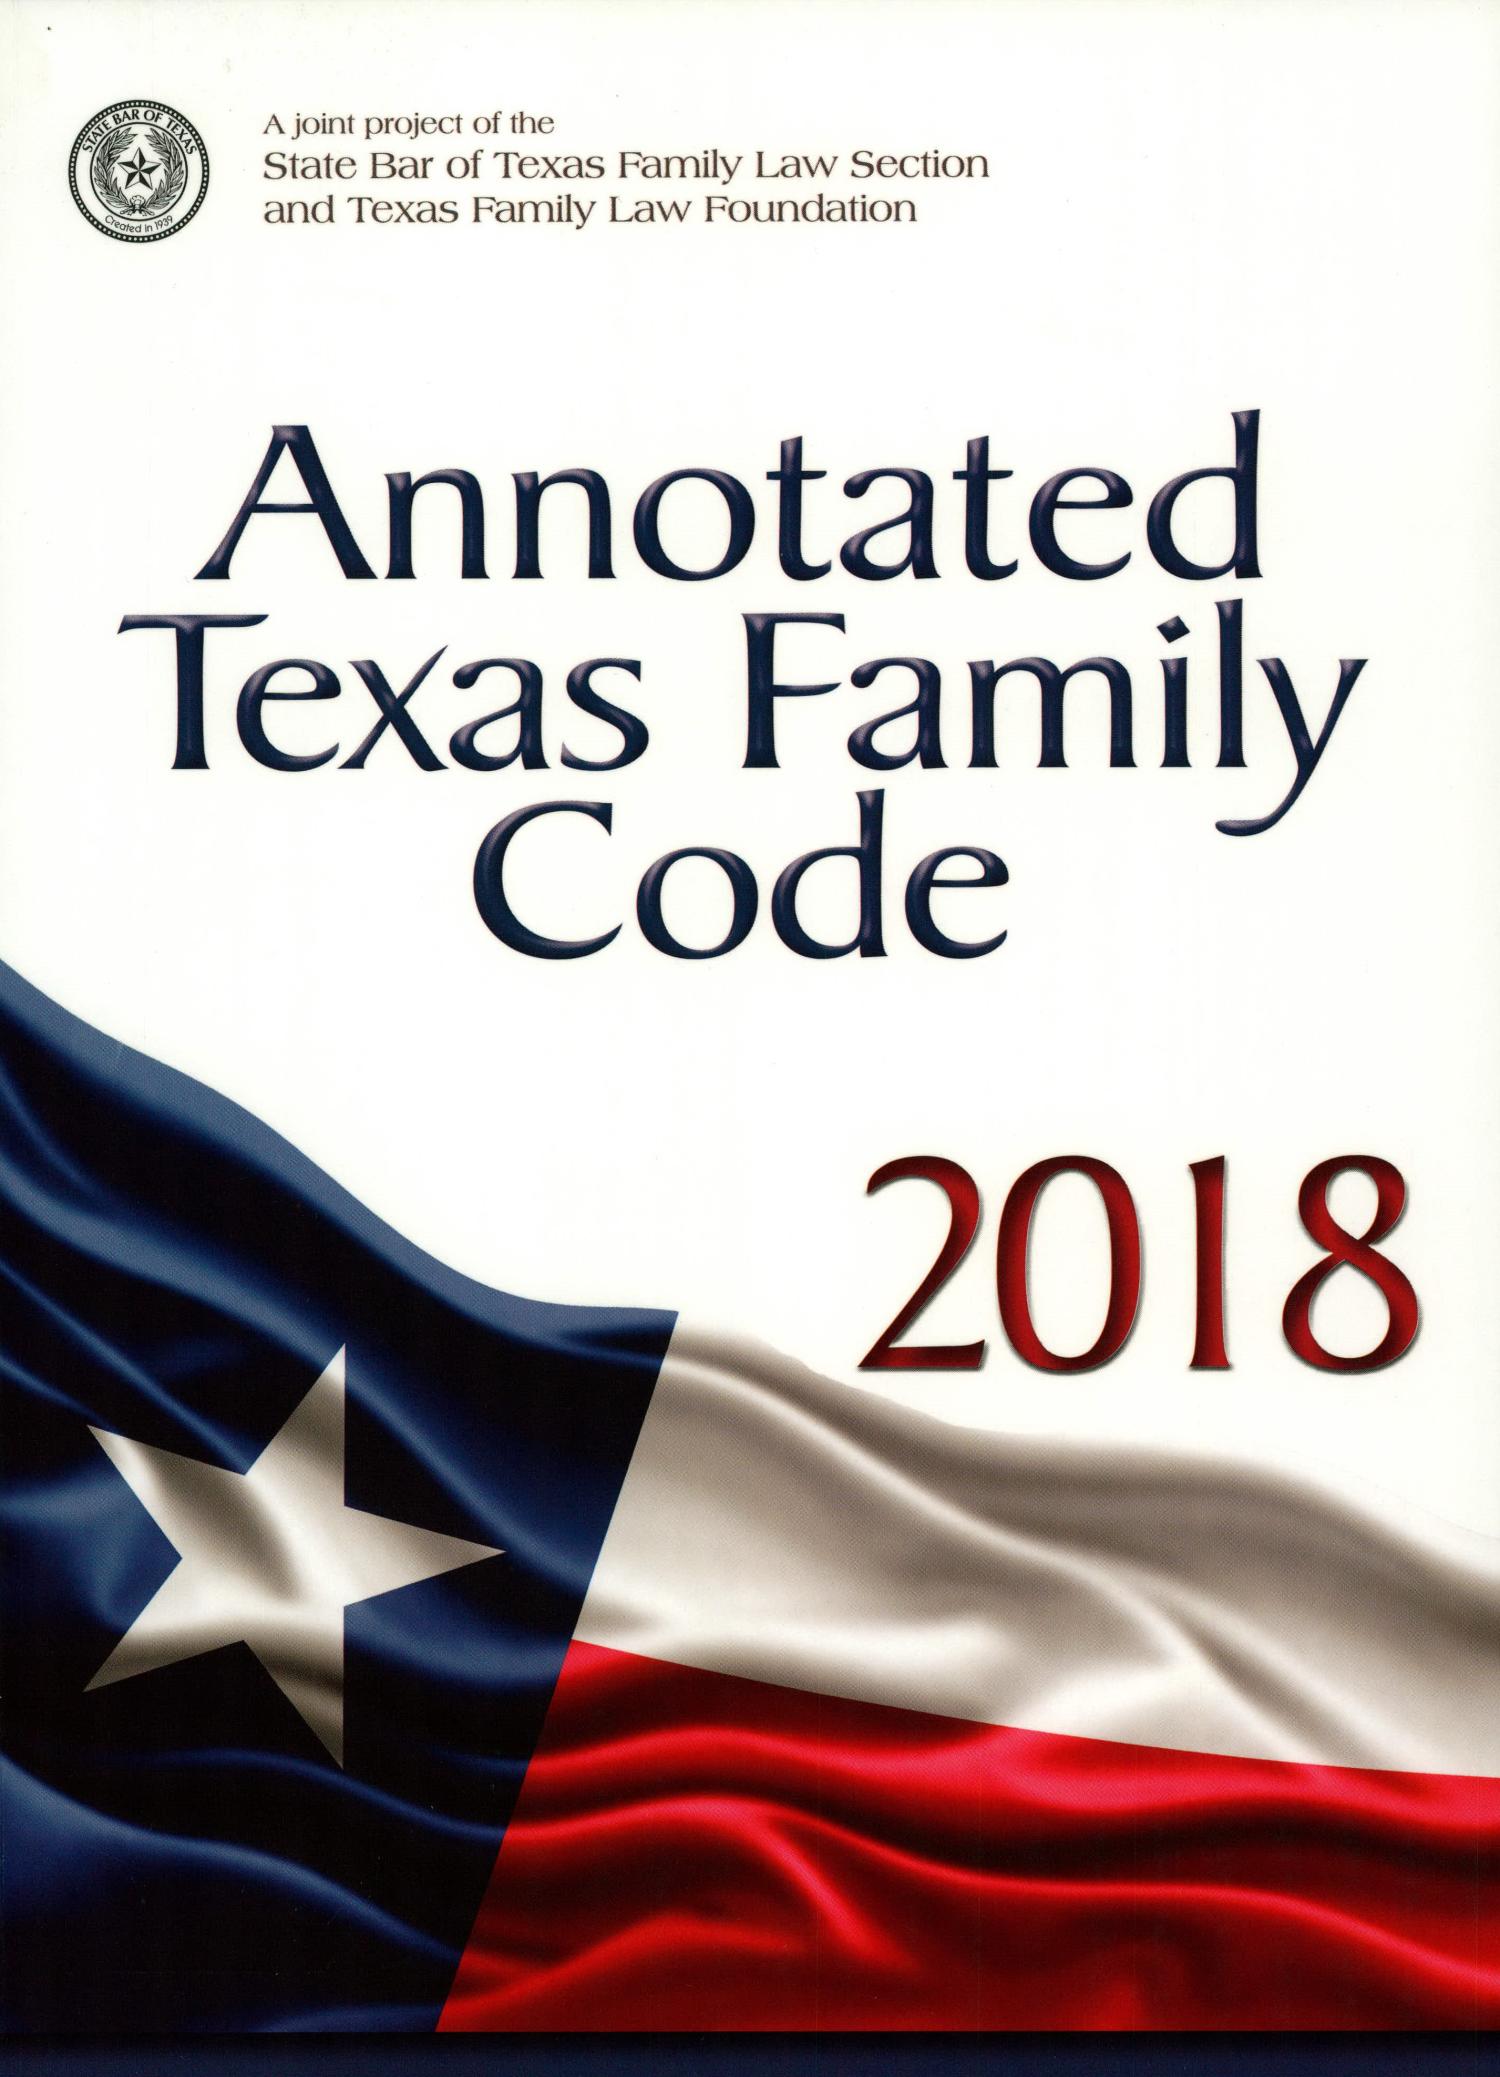 Annotated Texas Family Code The Portal to Texas History